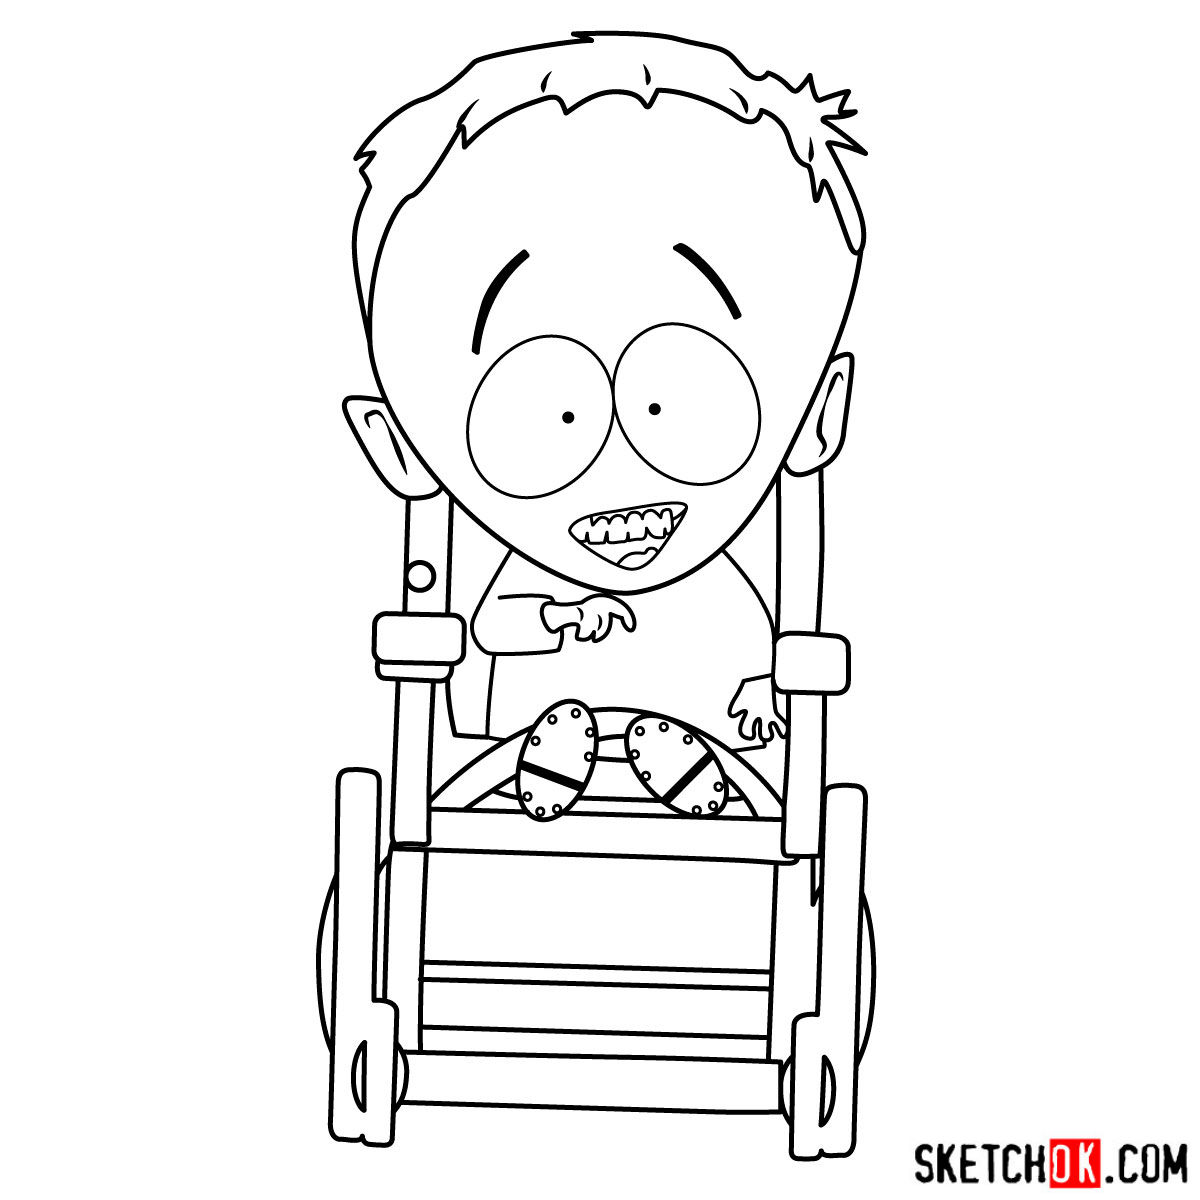 How to Draw Timmy Burch from South Park: Tips and Tricks